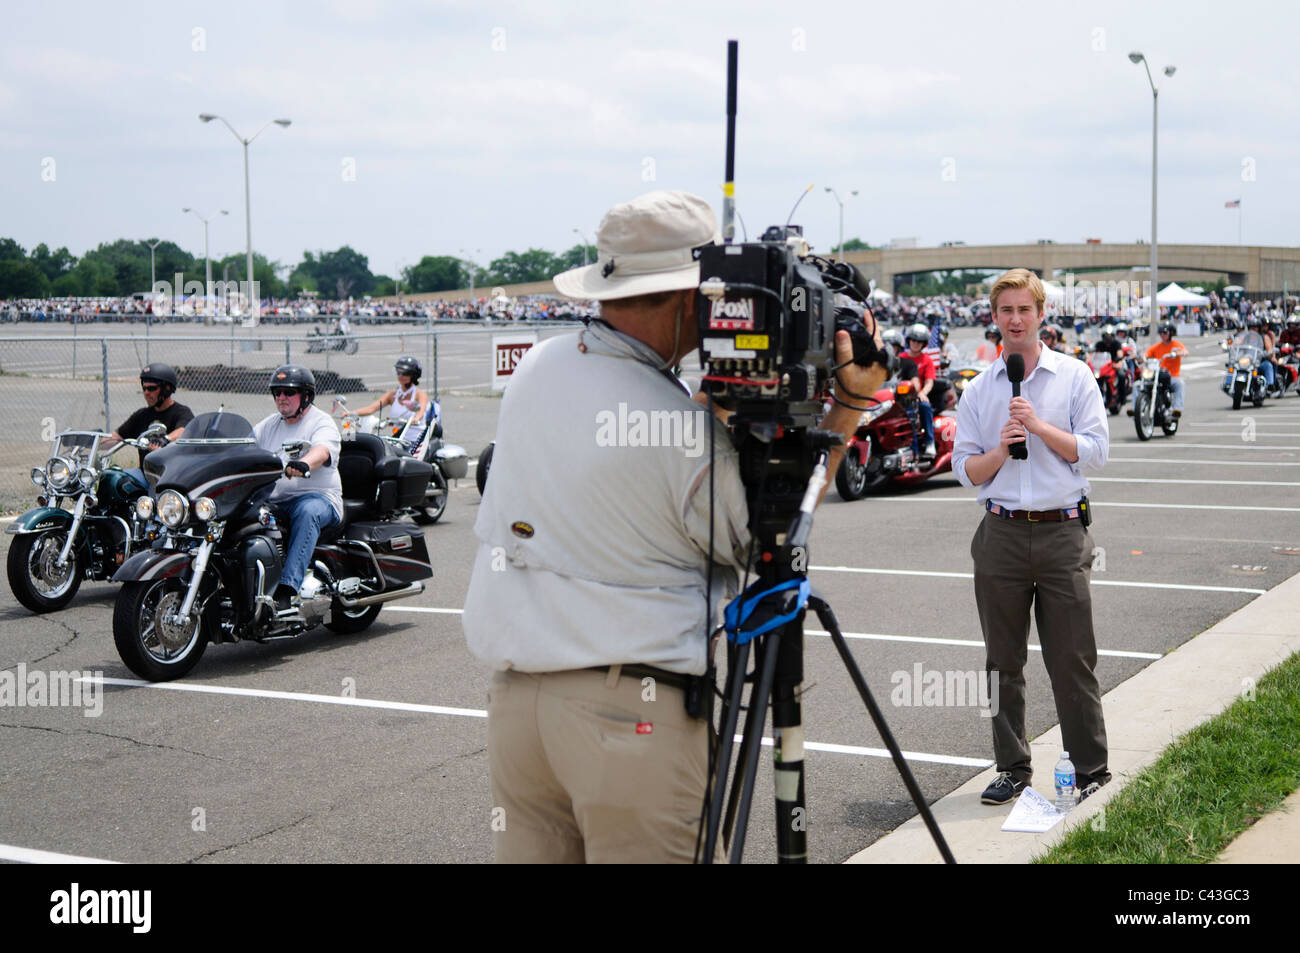 ARLINGTON, VA - A TV reporter broadcasts a feed in front of the riders departing for the annual Rolling Thunder motorcycle rally through downtown Washington DC on May 29, 2011. This shot was taken as the riders were leaving the staging area in the Pentagon's north parking lot, where thousands of bikes and riders had gathered. Stock Photo